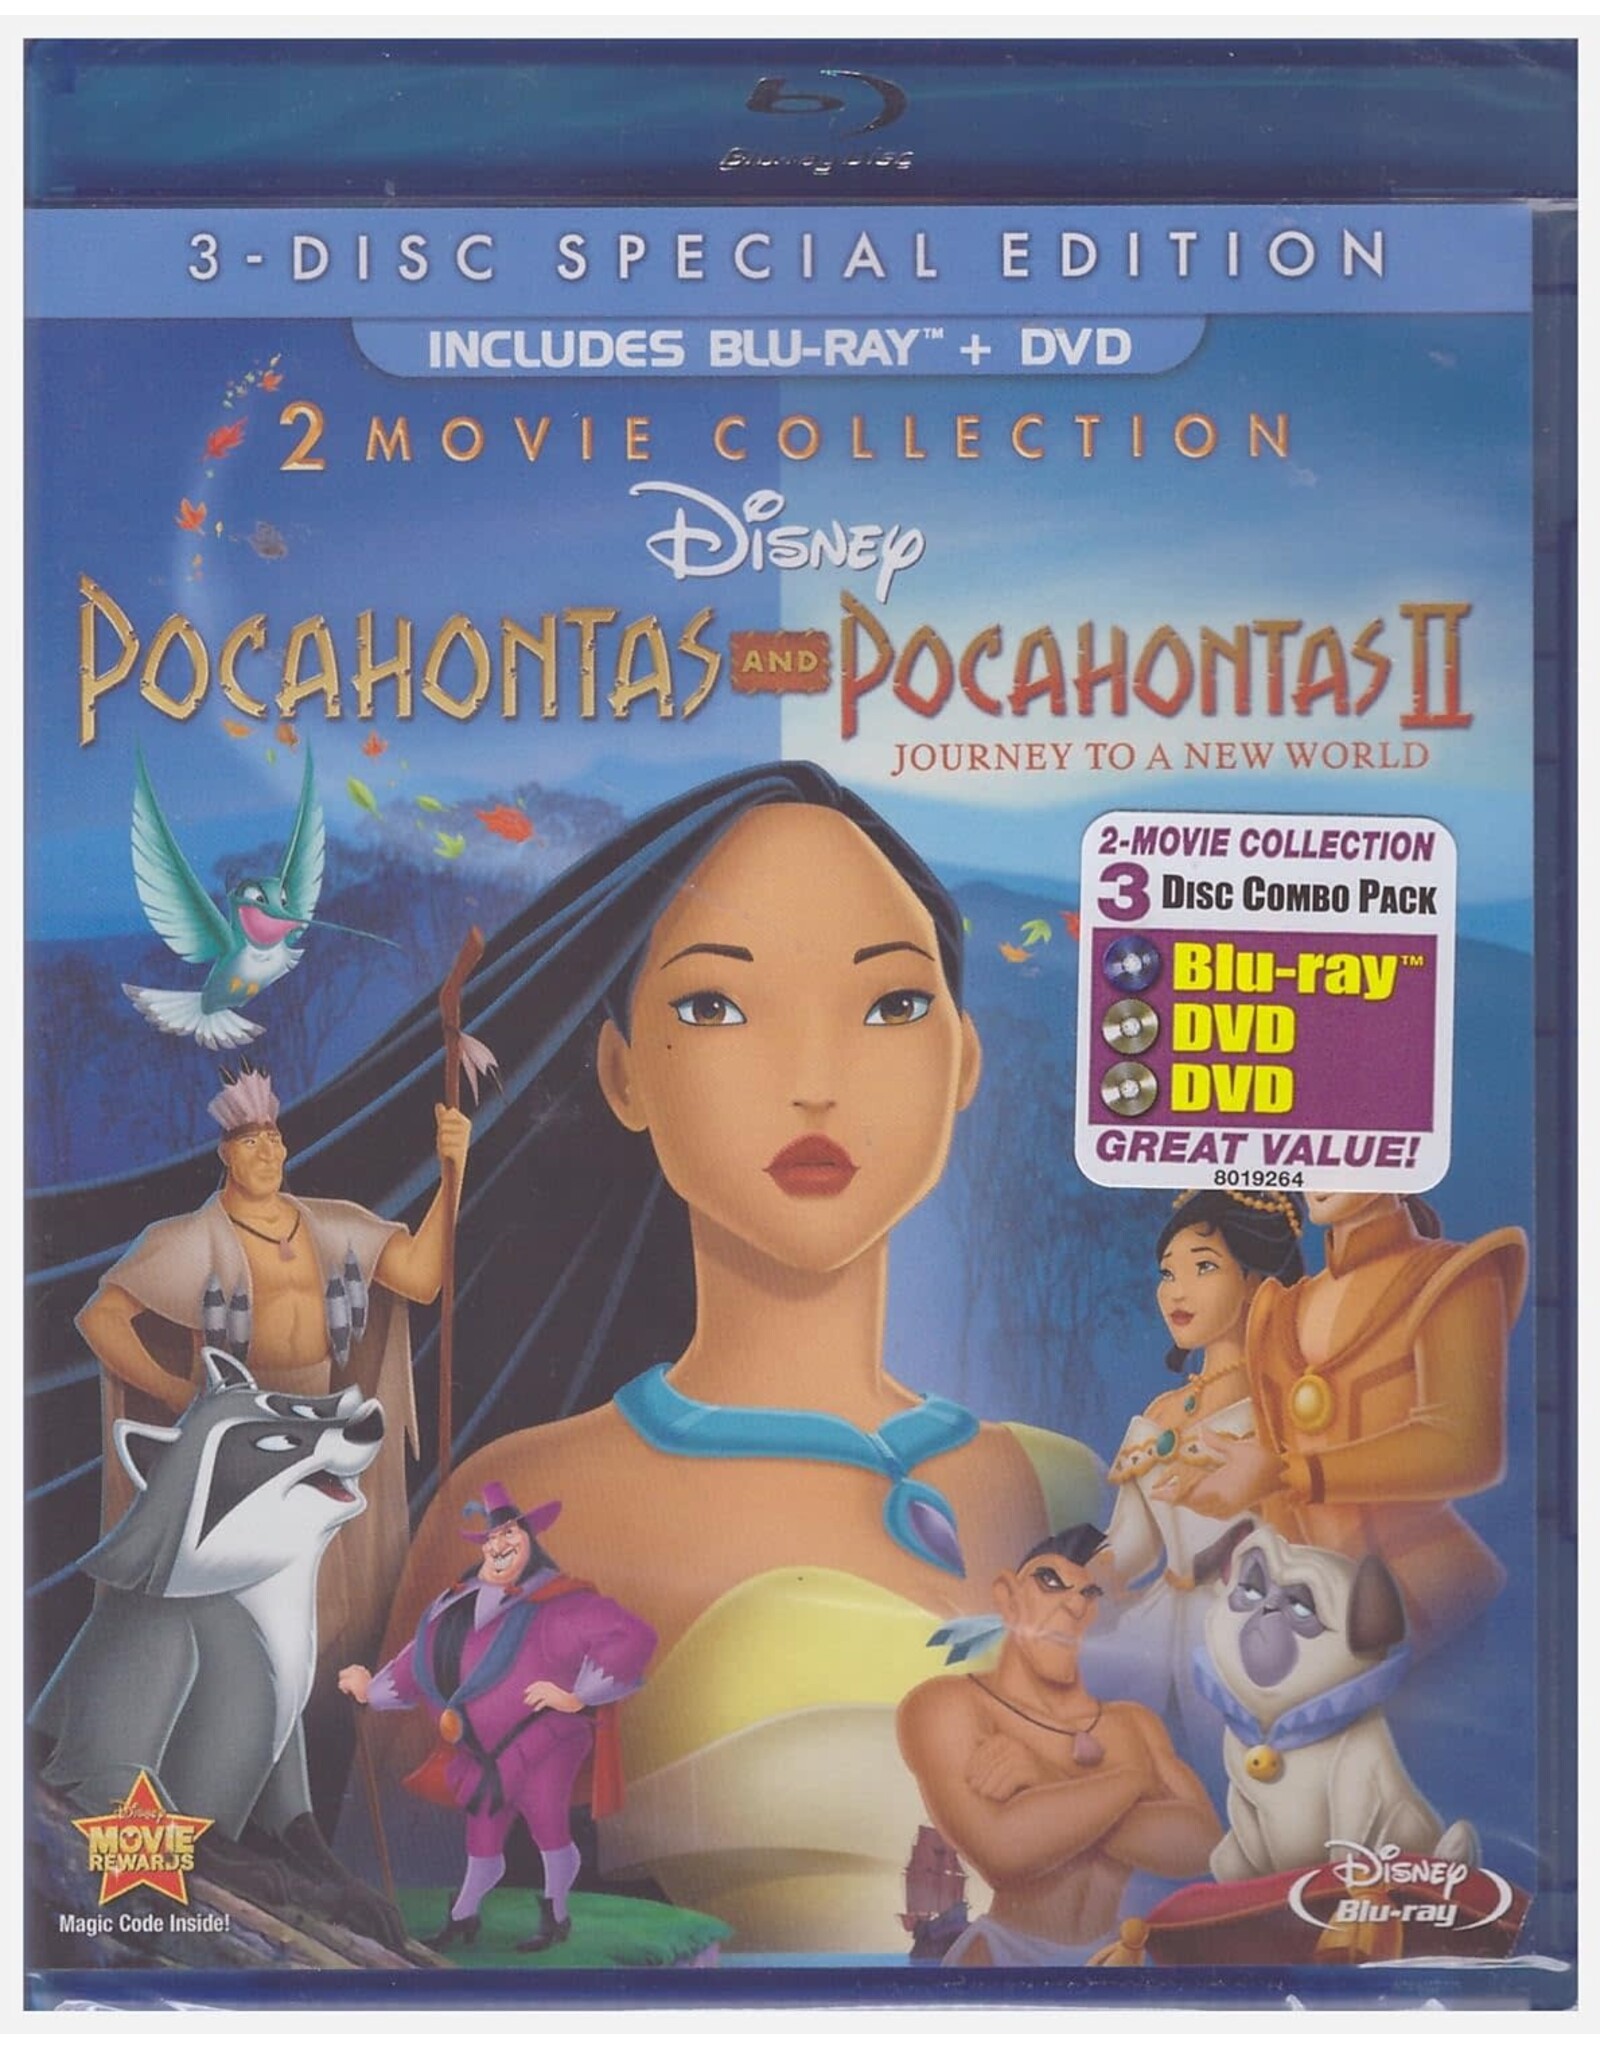 Anime & Animation Pocahontas / Pocahontas II Journey to a New World 3-Disc Special Edition (Brand New)